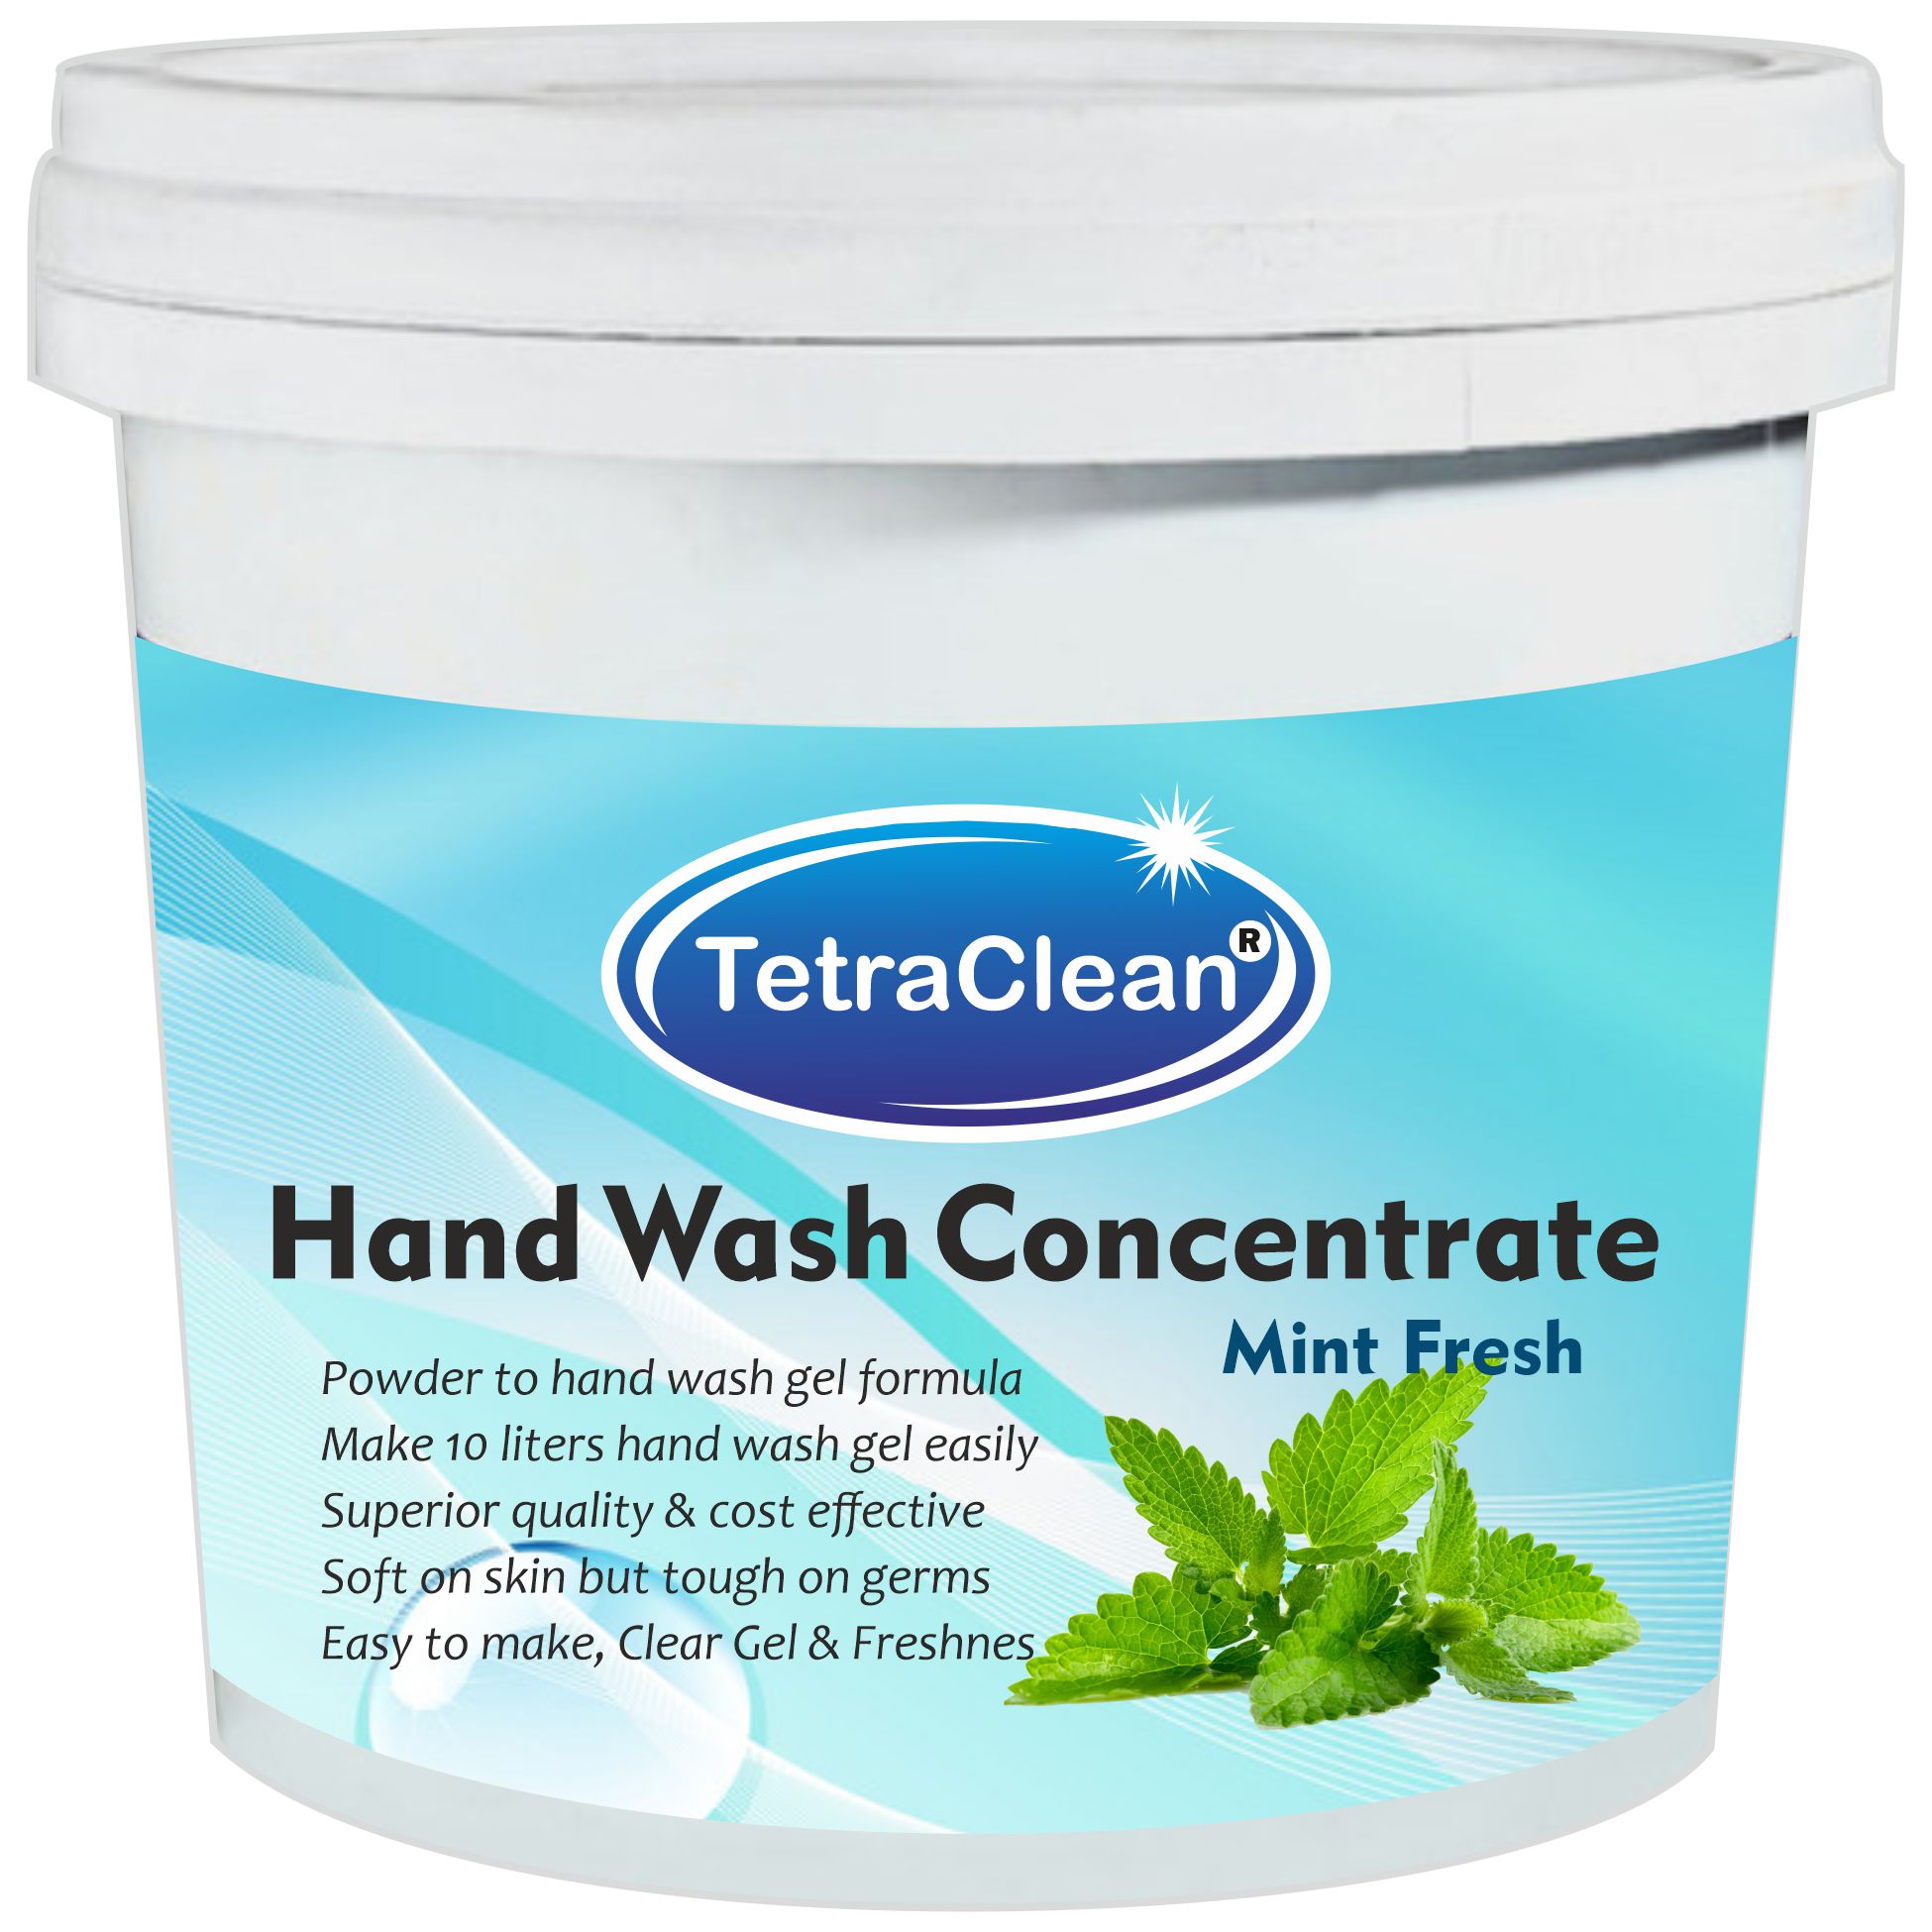 TetraClean Hand Wash Concentrate Powder - 500gm packing - with mint fragrance